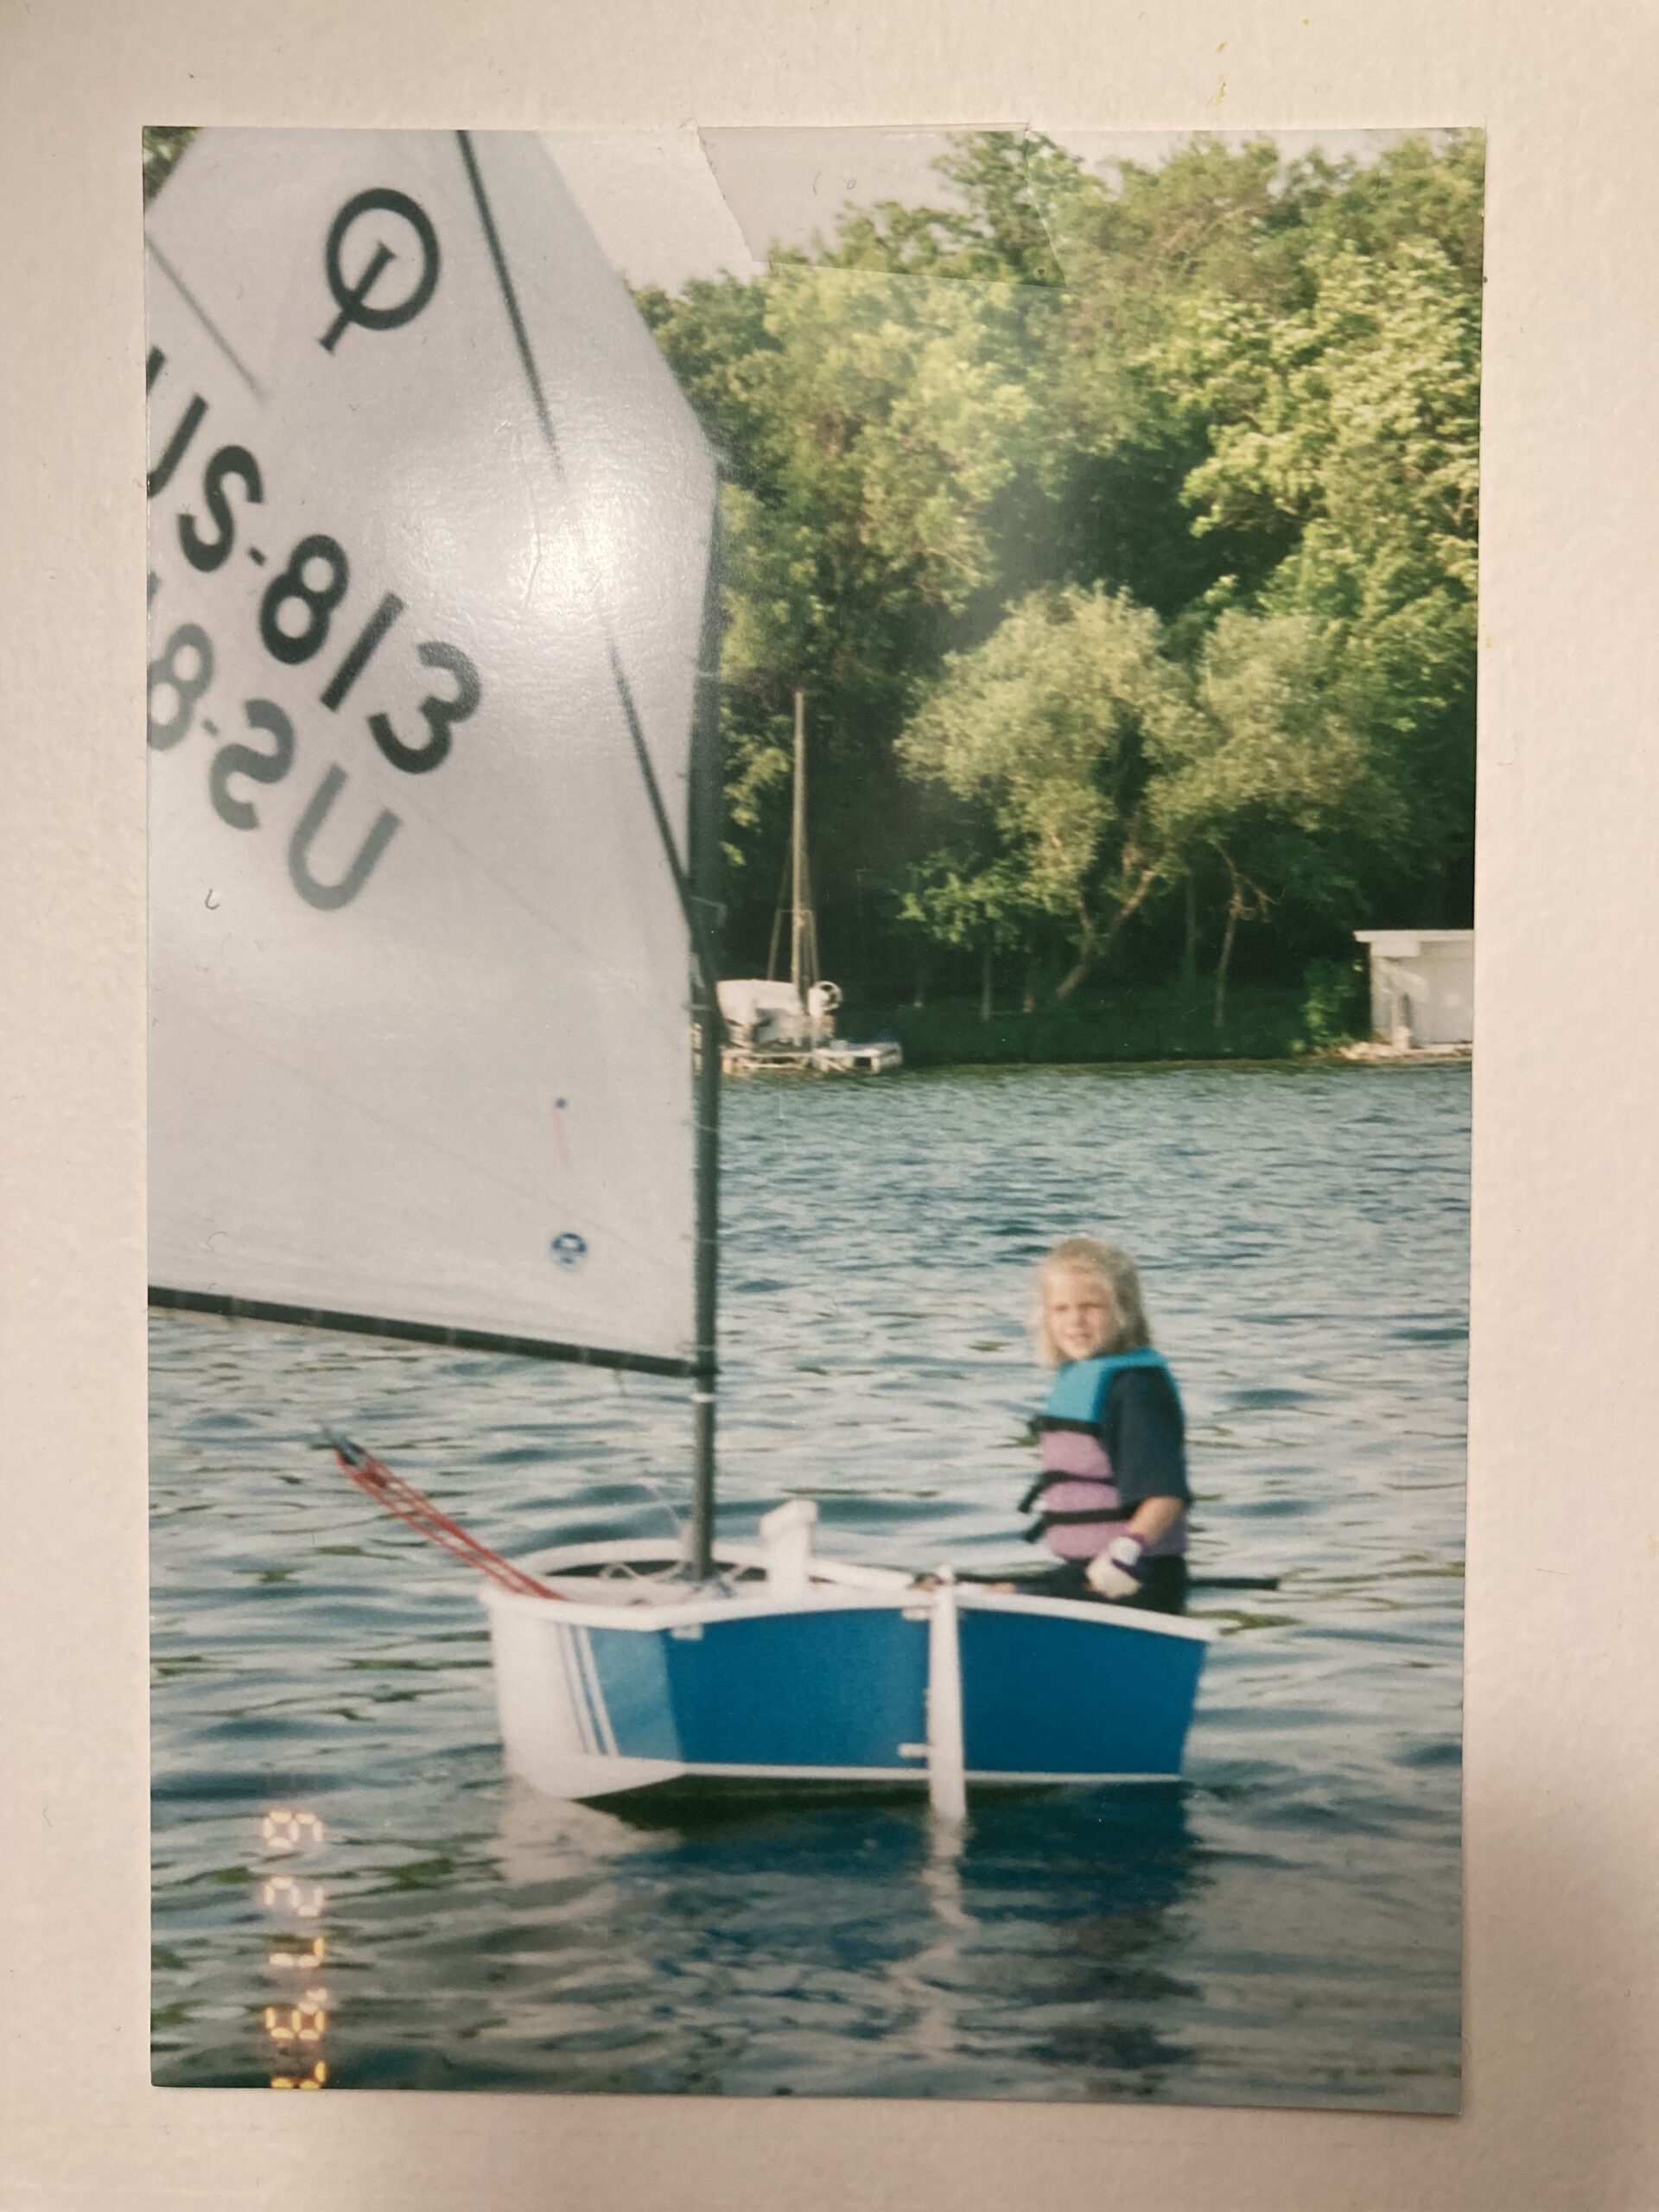 An 8-year-old Stephanie Roble sails on Lake Beulah in Wisconsin in June 1997. (Courtesy of Stephanie Roble)